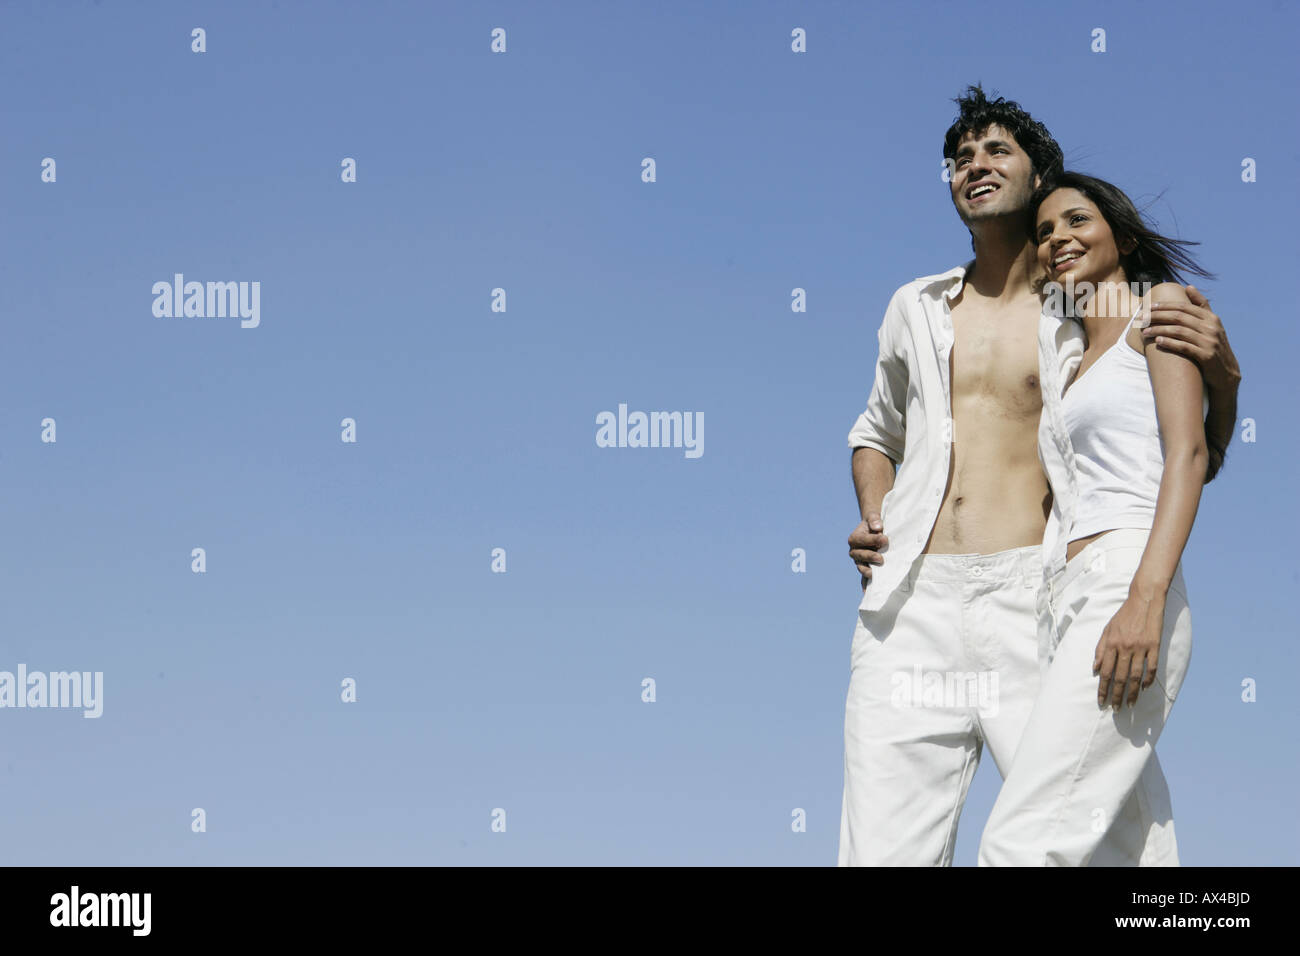 Low angle view of a young man standing with his girlfriend and smiling Stock Photo